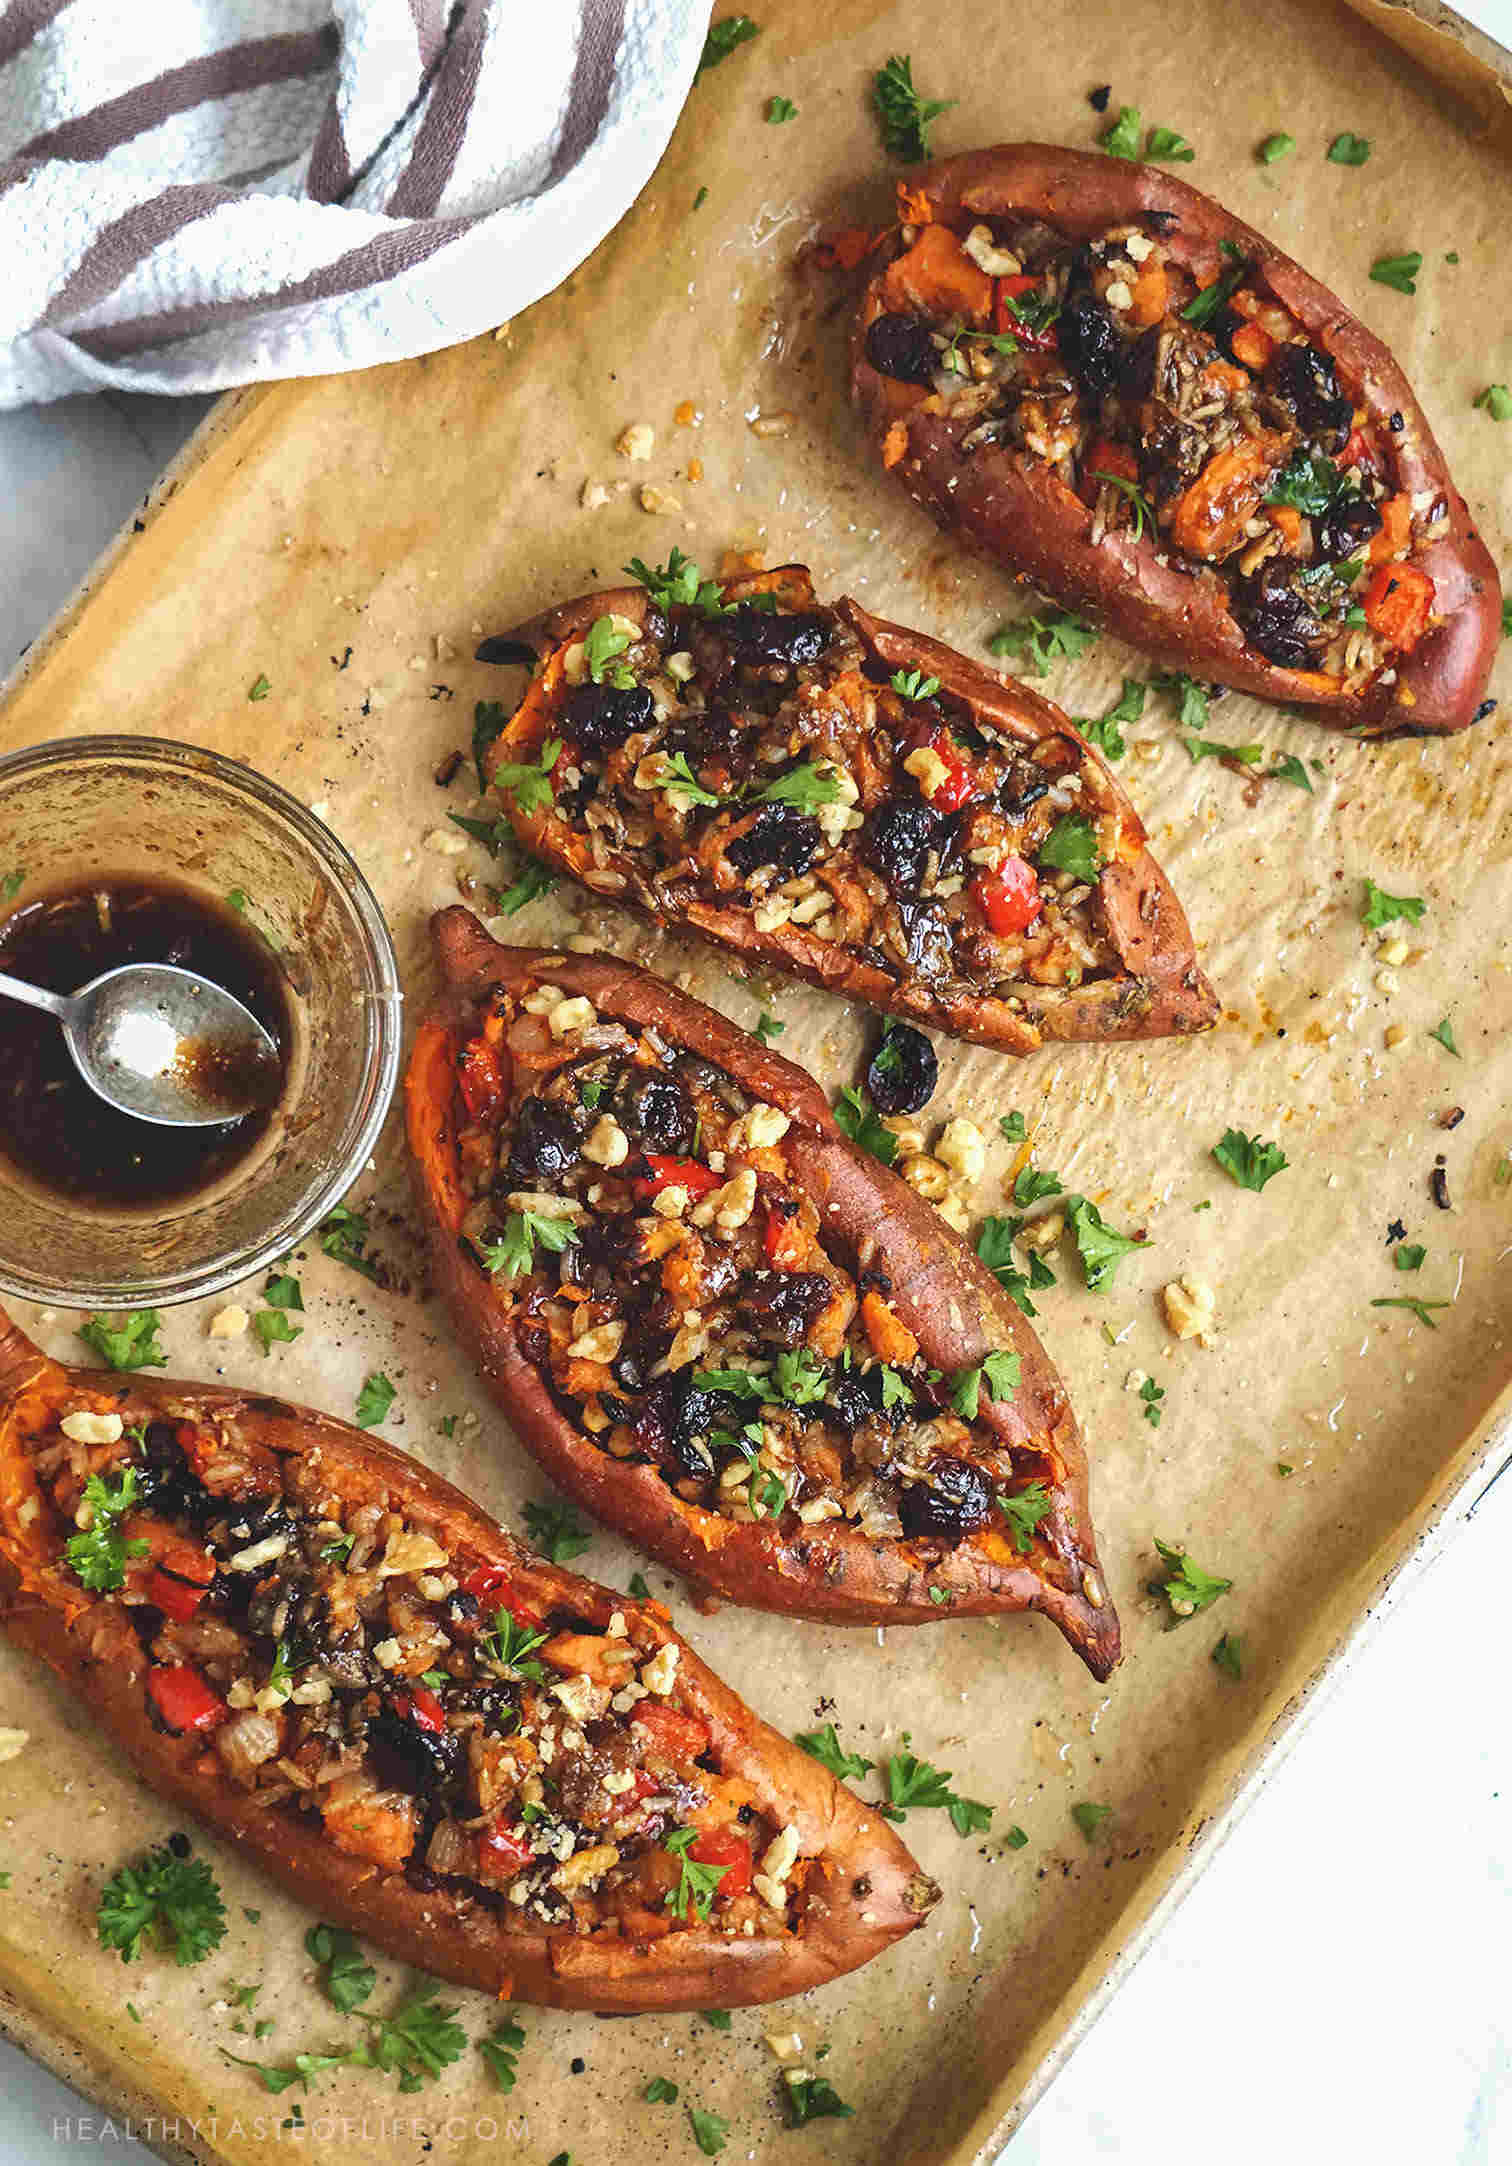 These Baked Stuffed Sweet Potatoes make a great, filling, healthy dinner, lunch, breakfast or side dish recipe for your Thanksgiving table. Loaded Baked sweet potato skins baked to perfection and then stuffed with the most delicious rice based vegan filling - with sweet and savory notes. A perfect healthy holiday side dish – vegan, gluten free, dairy free, clean eating recipe.